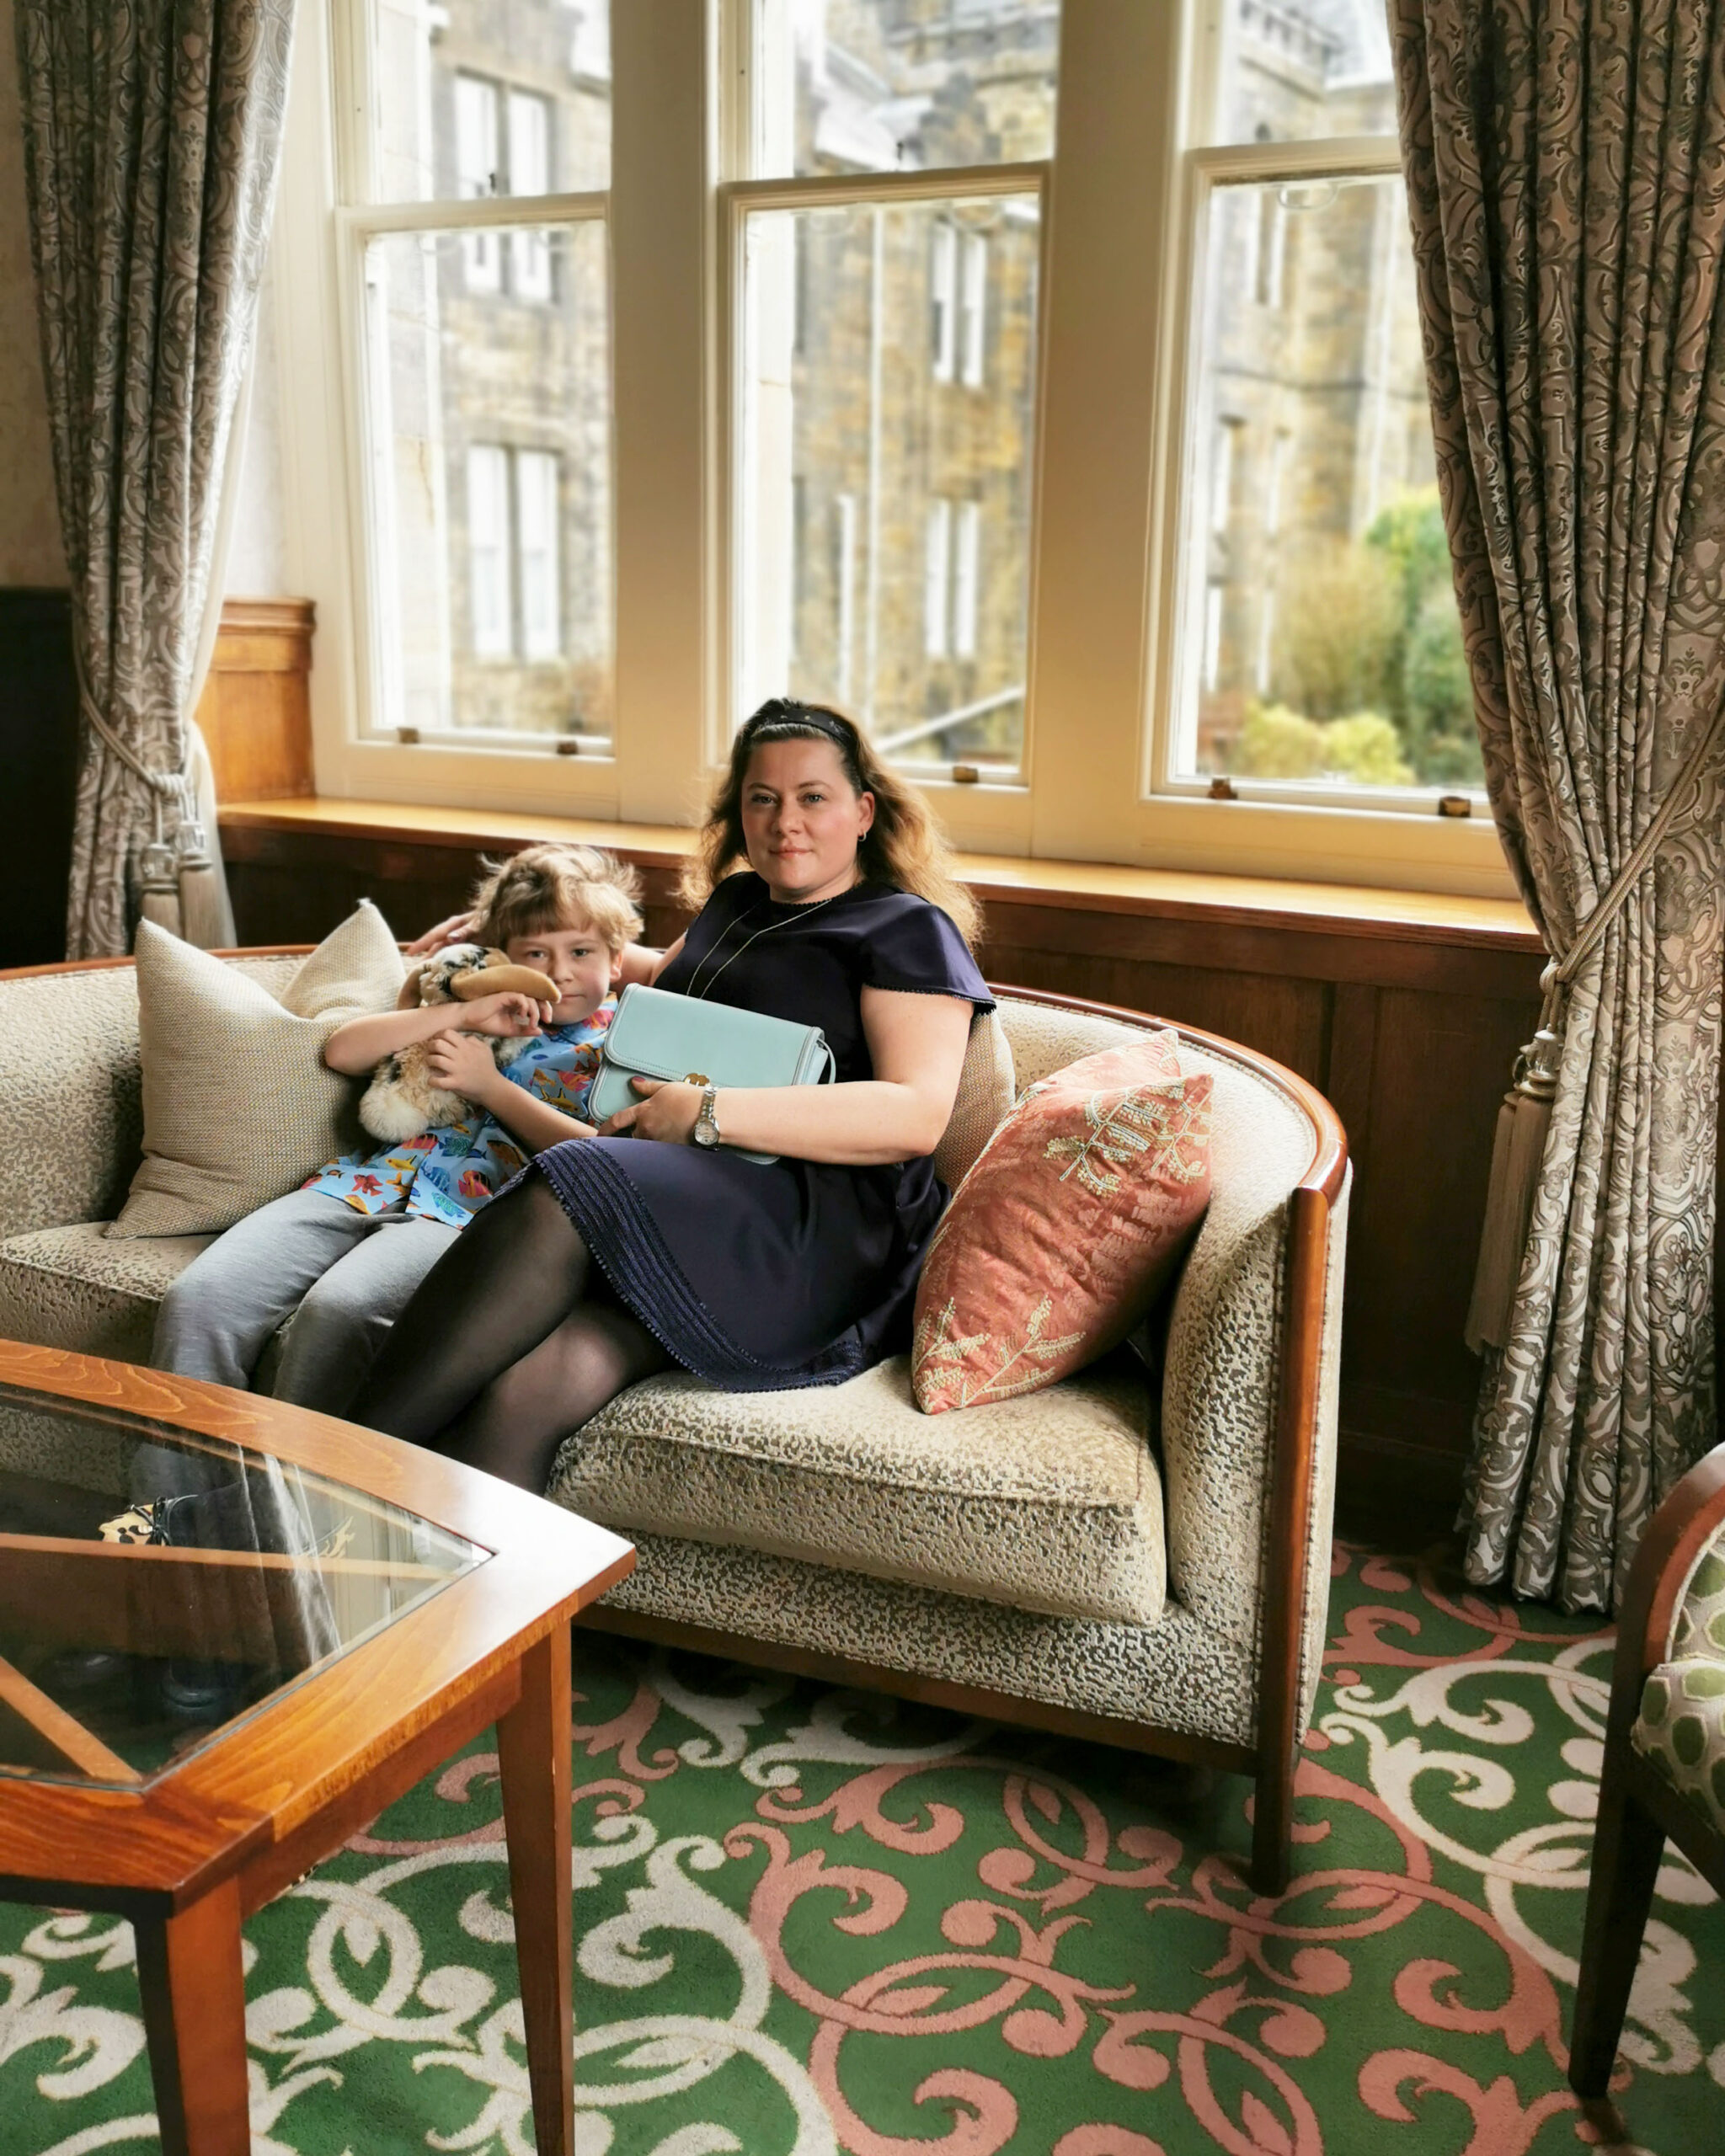  Ashdown Park Hotel, Family-Friendly, Family Staycation, Ashdown Forest, East Sussex, Hotel Review, Family Blog, Family Travel, Hotel Review, Family Weekend